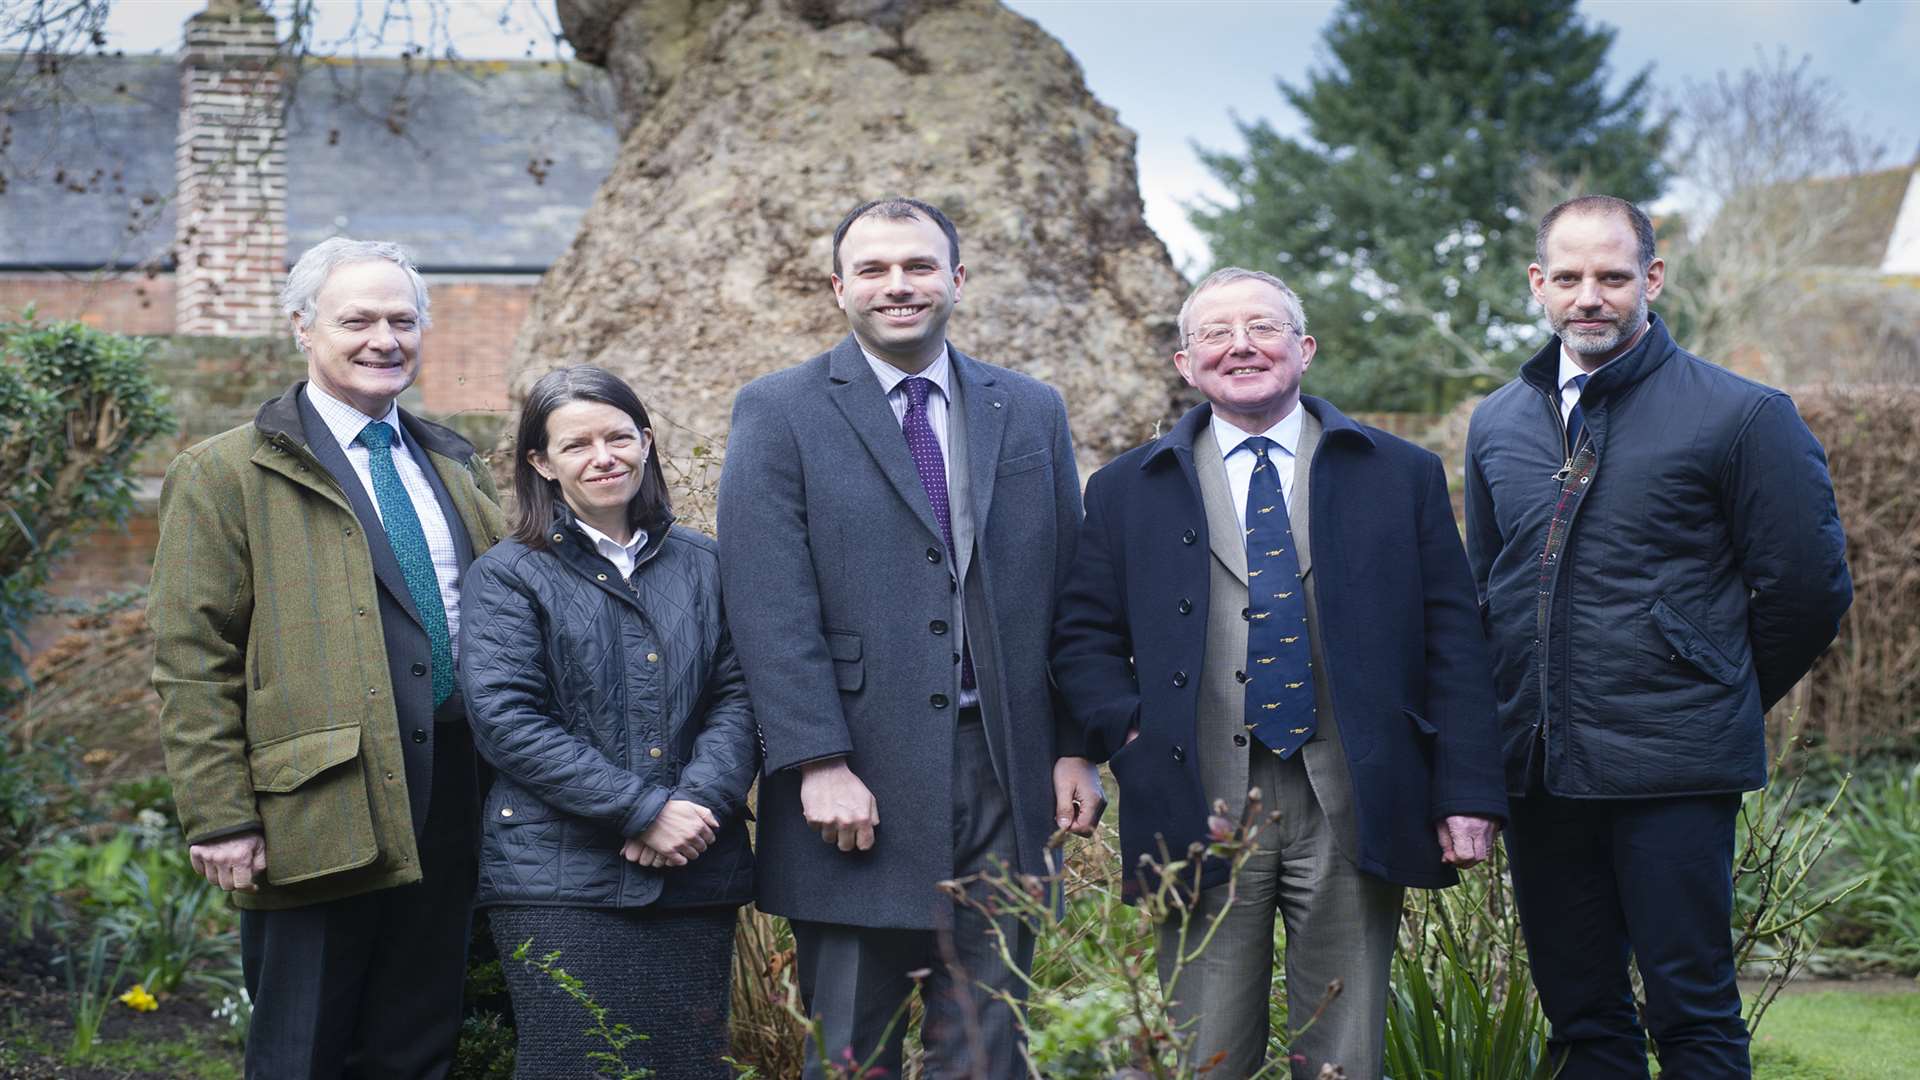 The Furley Page agriculture and rural business team, from left, David Hall, Nicola Hopper, Ethan Desai, Christopher Wacher and Jeremy Licence